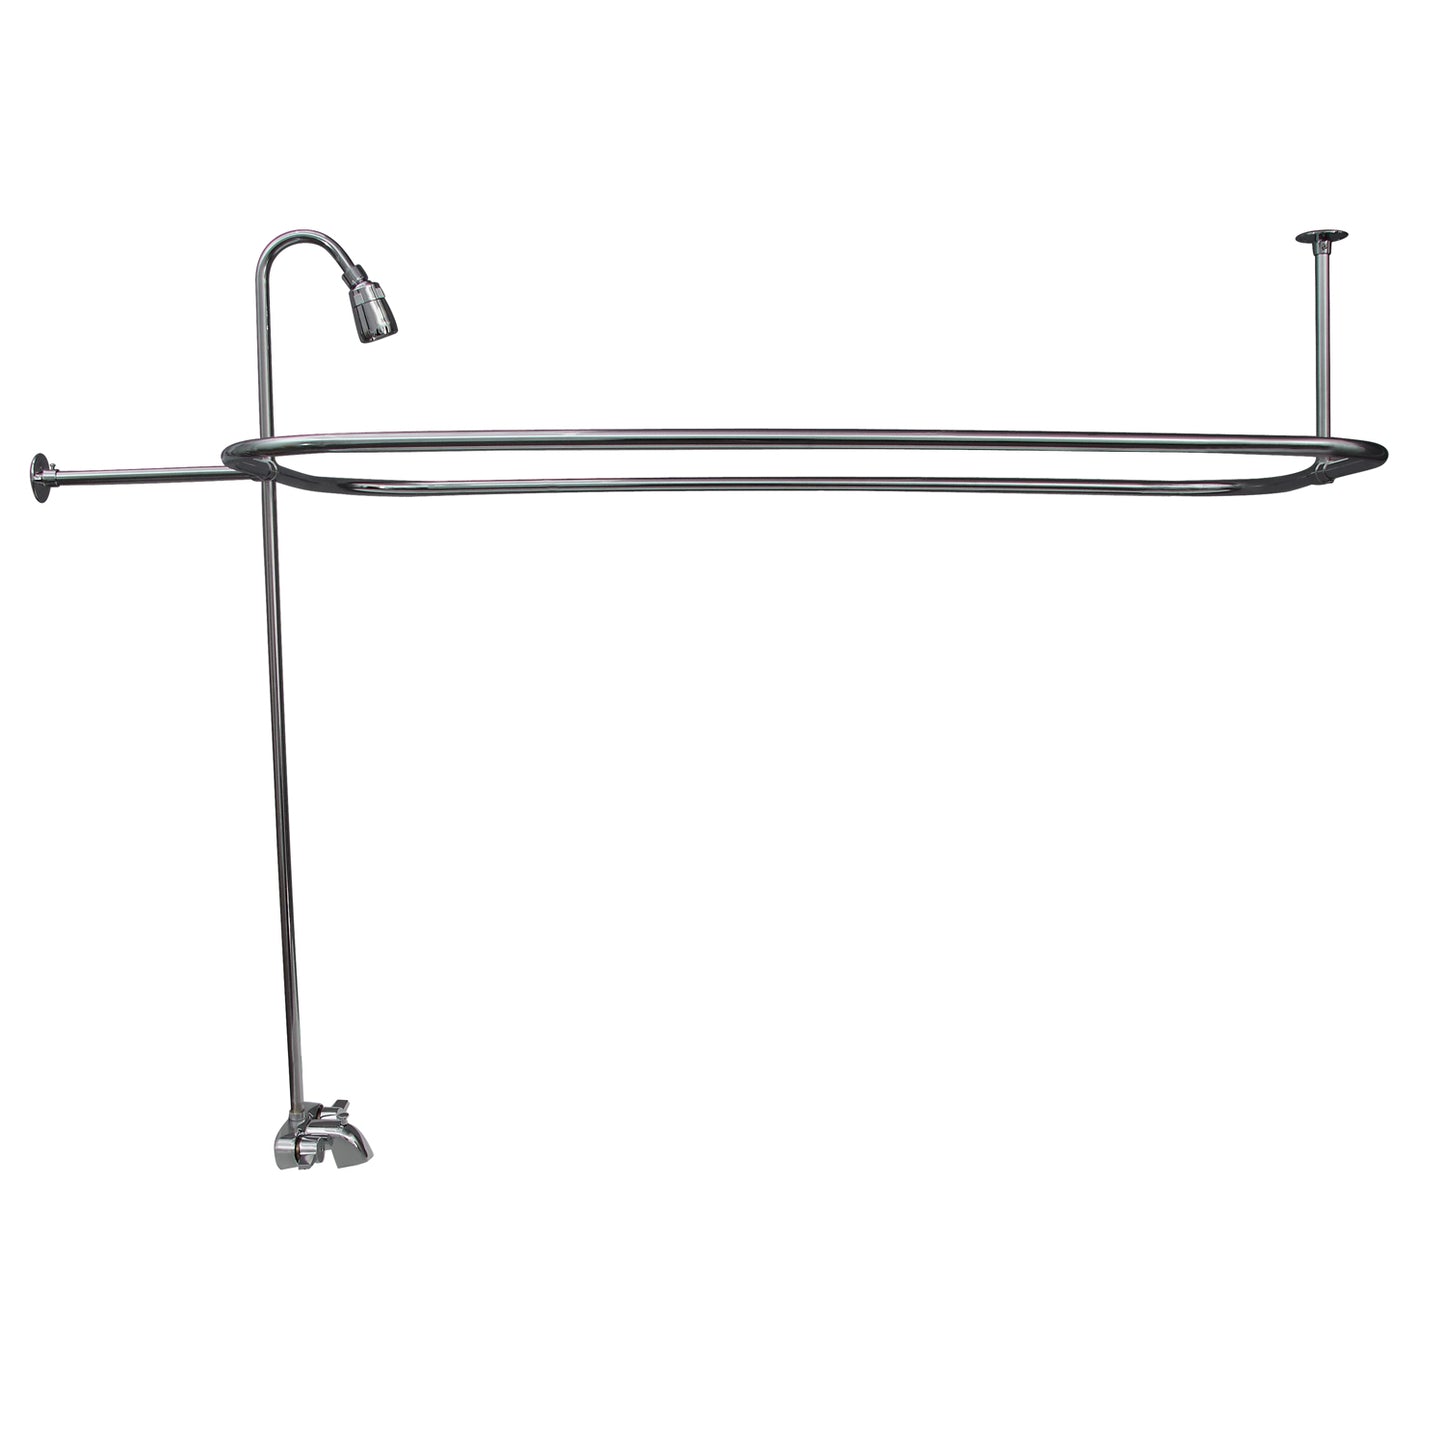 Complete Basic Tub Faucet & Shower Kit with 48" x 24" Rod, Shower Head, Chrome